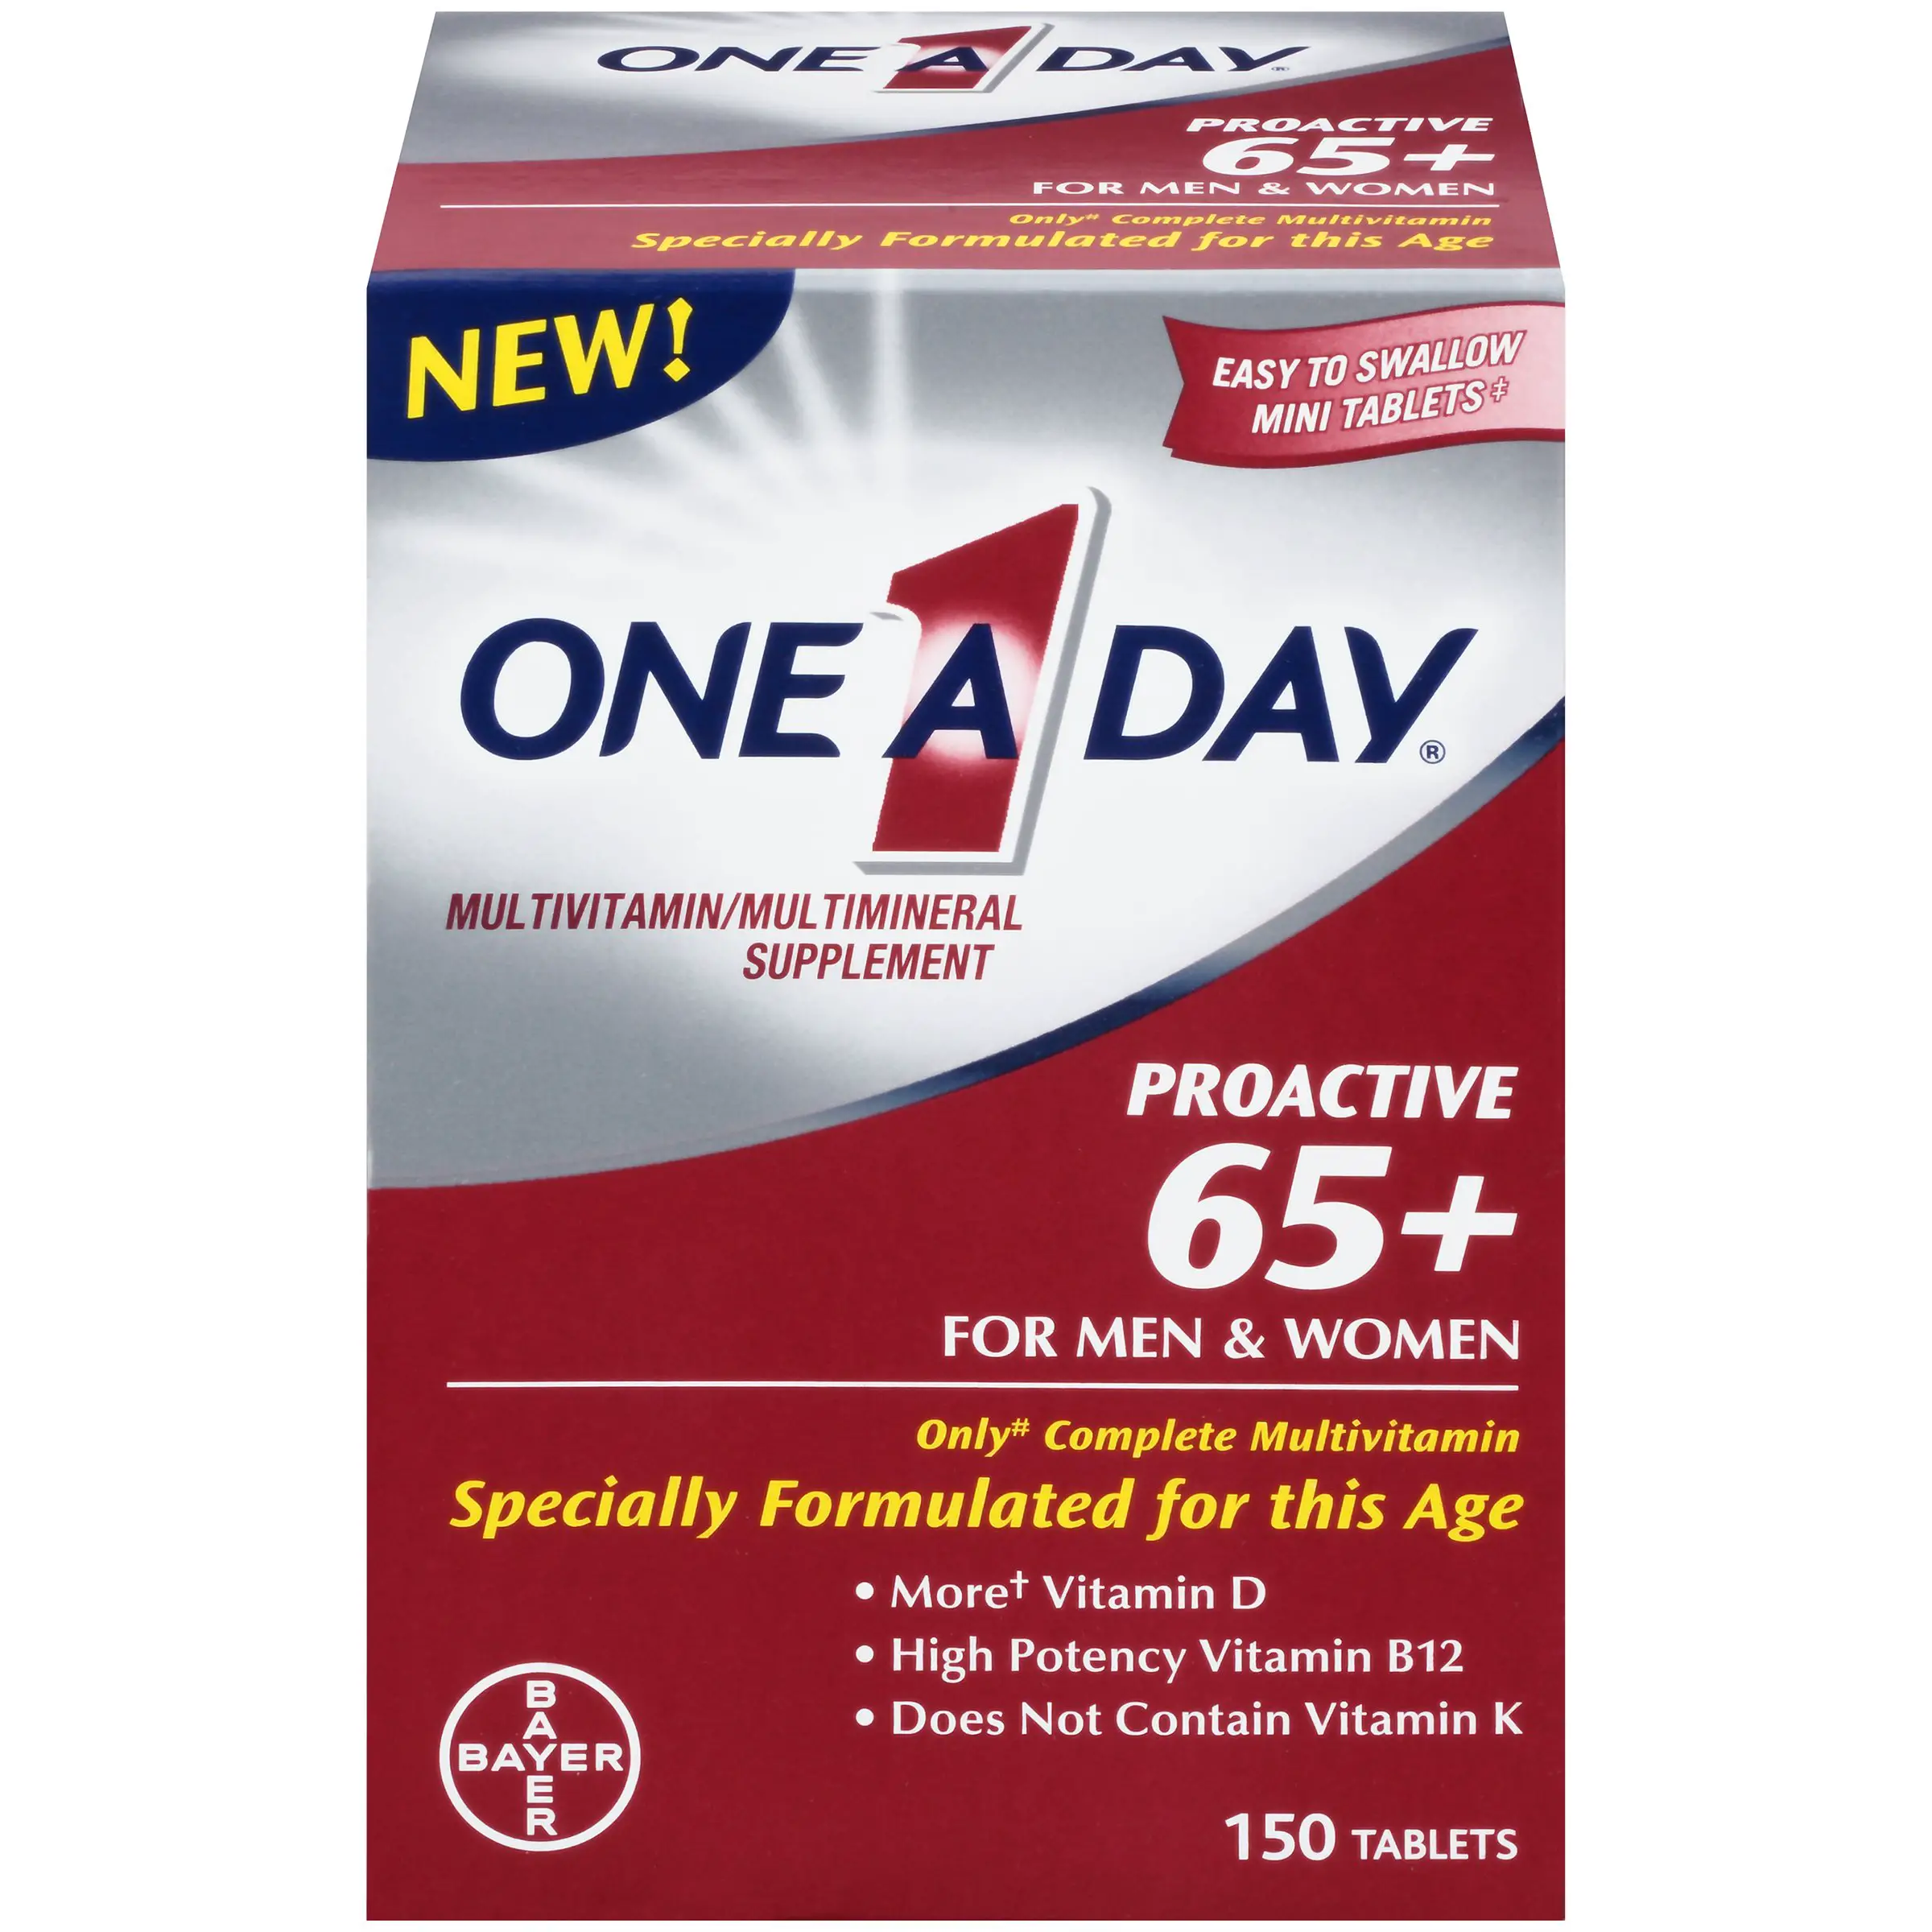 ONE A DAY Proactive 65+ Multivitamin Supplement for Men ...